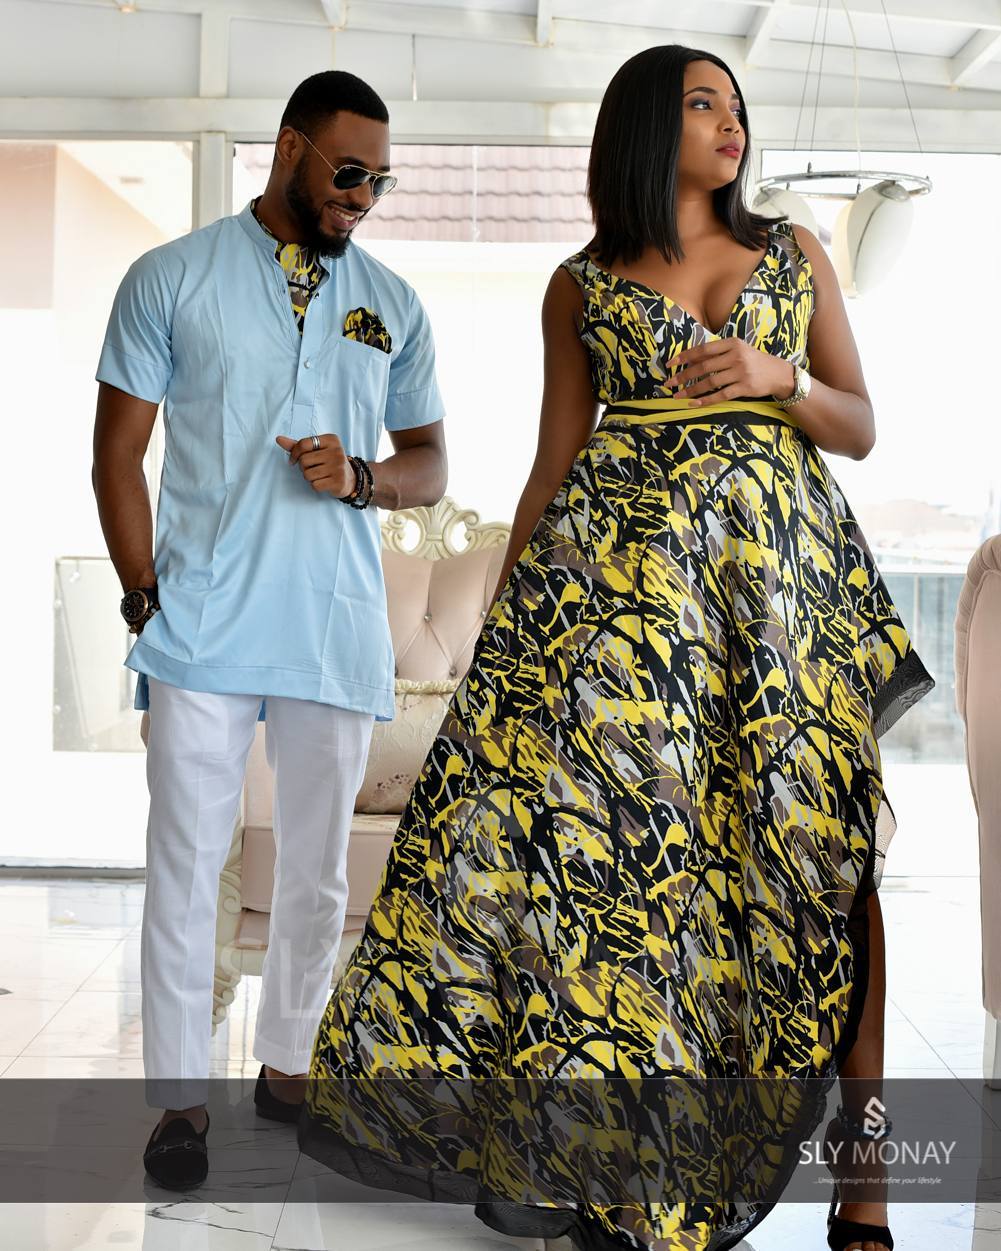  “Let These Ankara Styles Put You In The Weekend Mood” is locked Image: Let These Ankara Styles Put You In The Weekend Mood